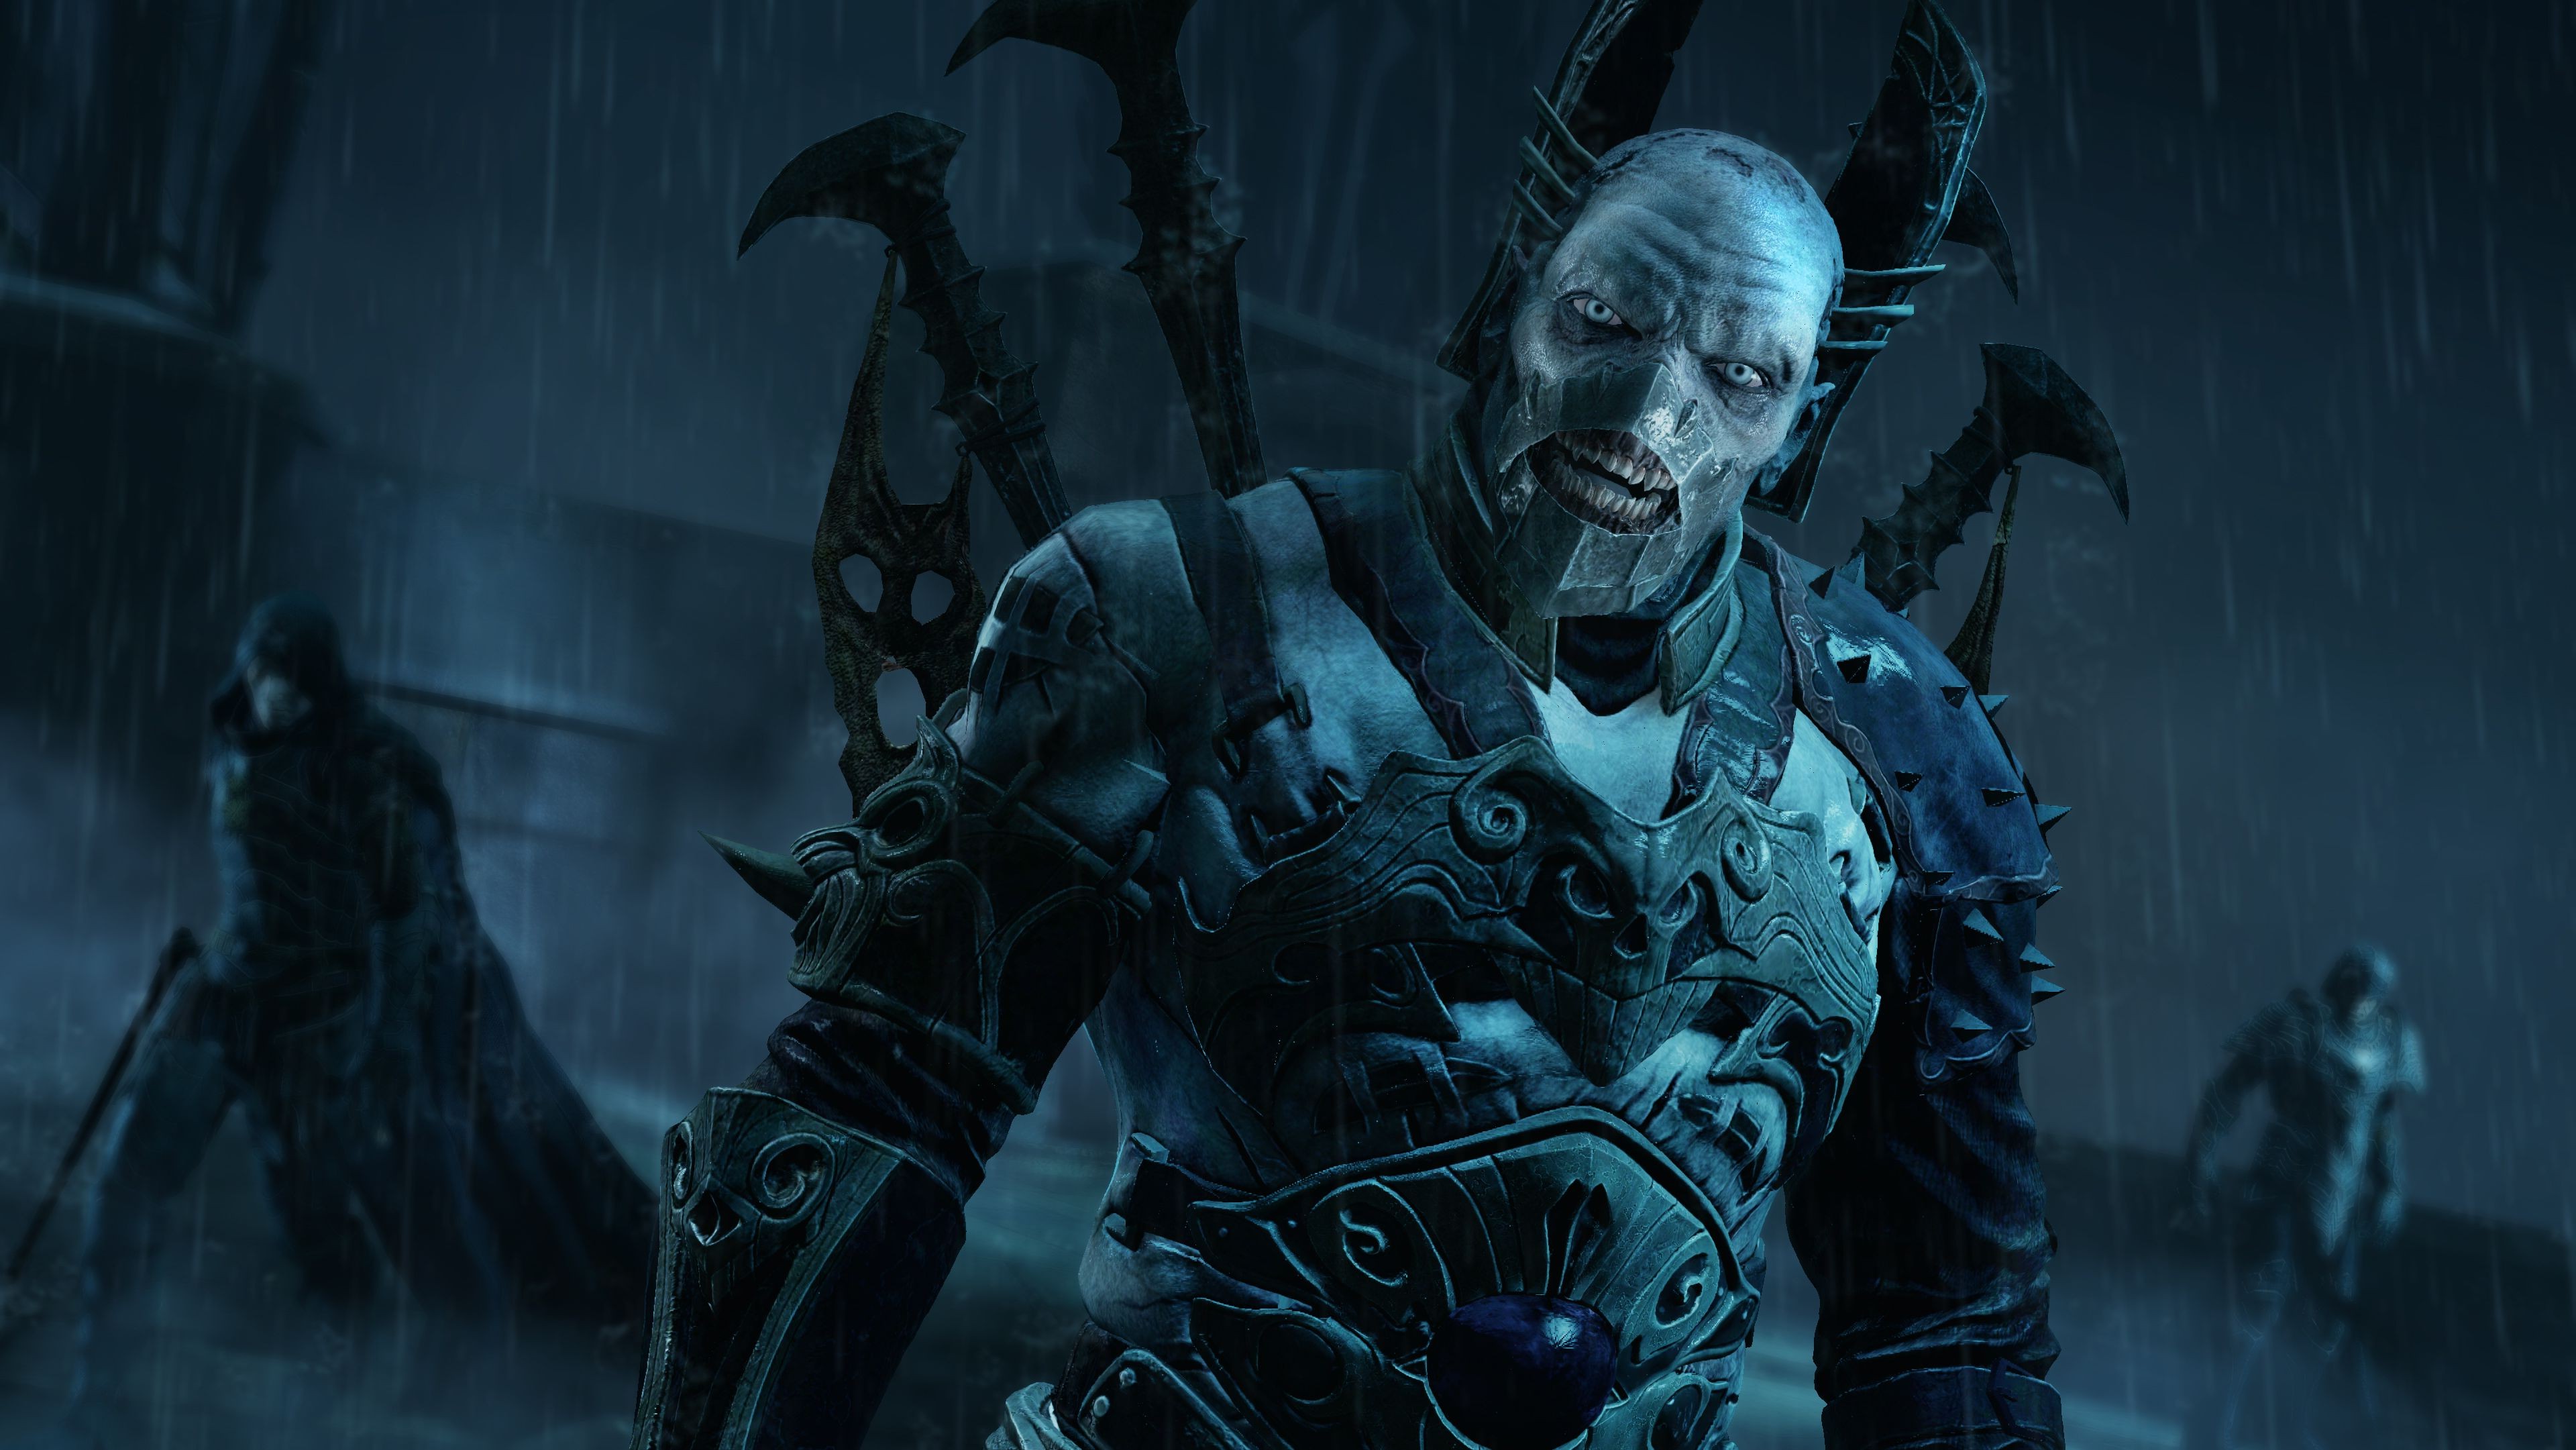 Middle earth: Shadow Of Mordor, Video Games Wallpaper